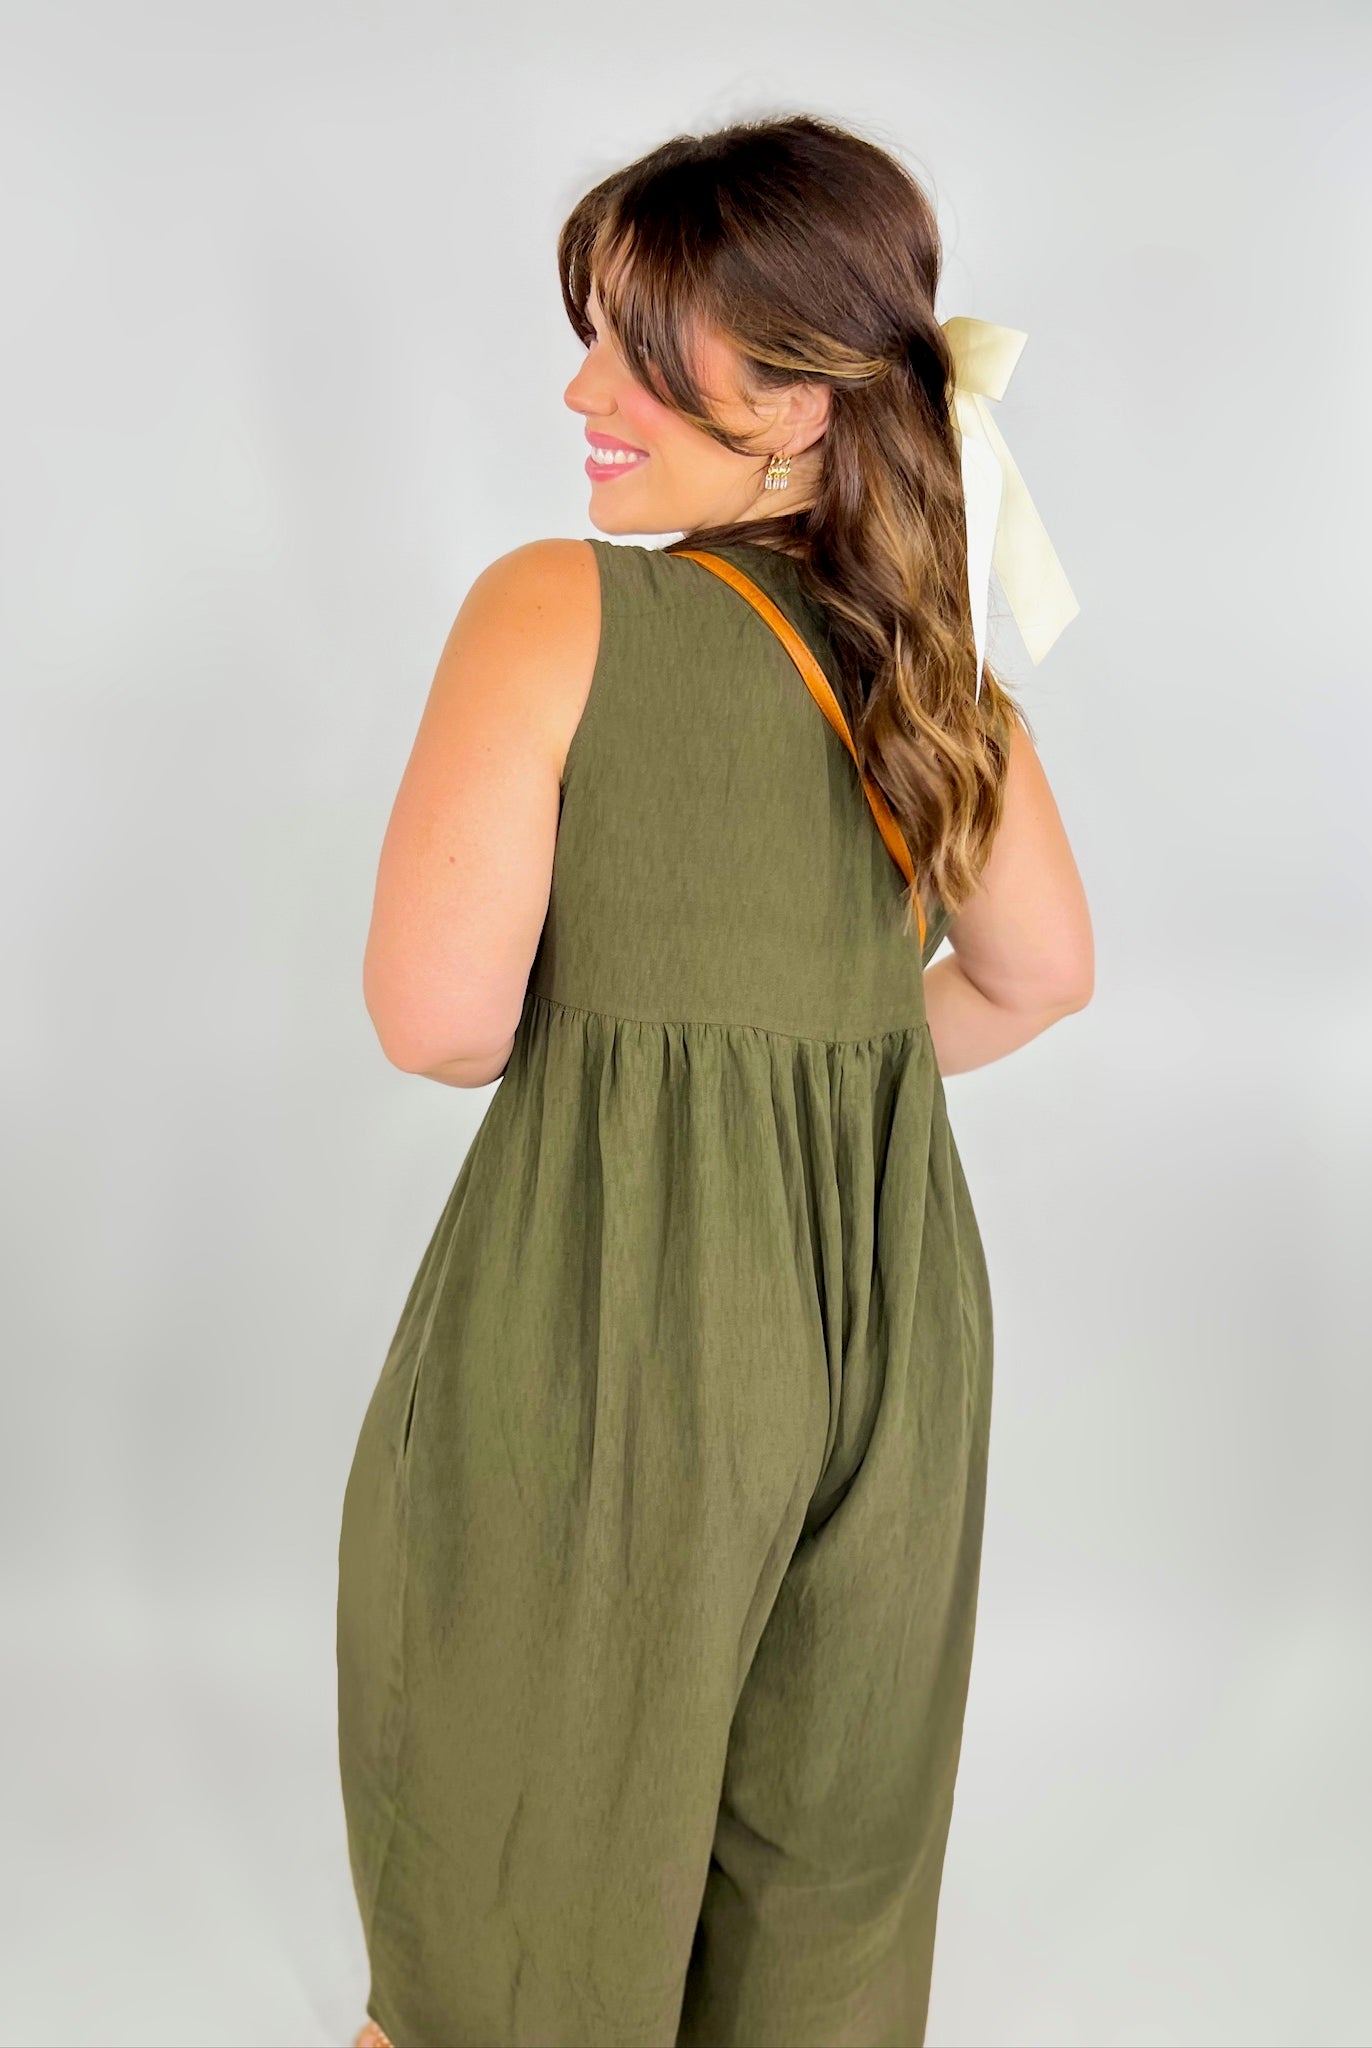 RESTOCK : The Good Flow Romper-230 Dresses/Jumpsuits/Rompers-Oddi-Heathered Boho Boutique, Women's Fashion and Accessories in Palmetto, FL